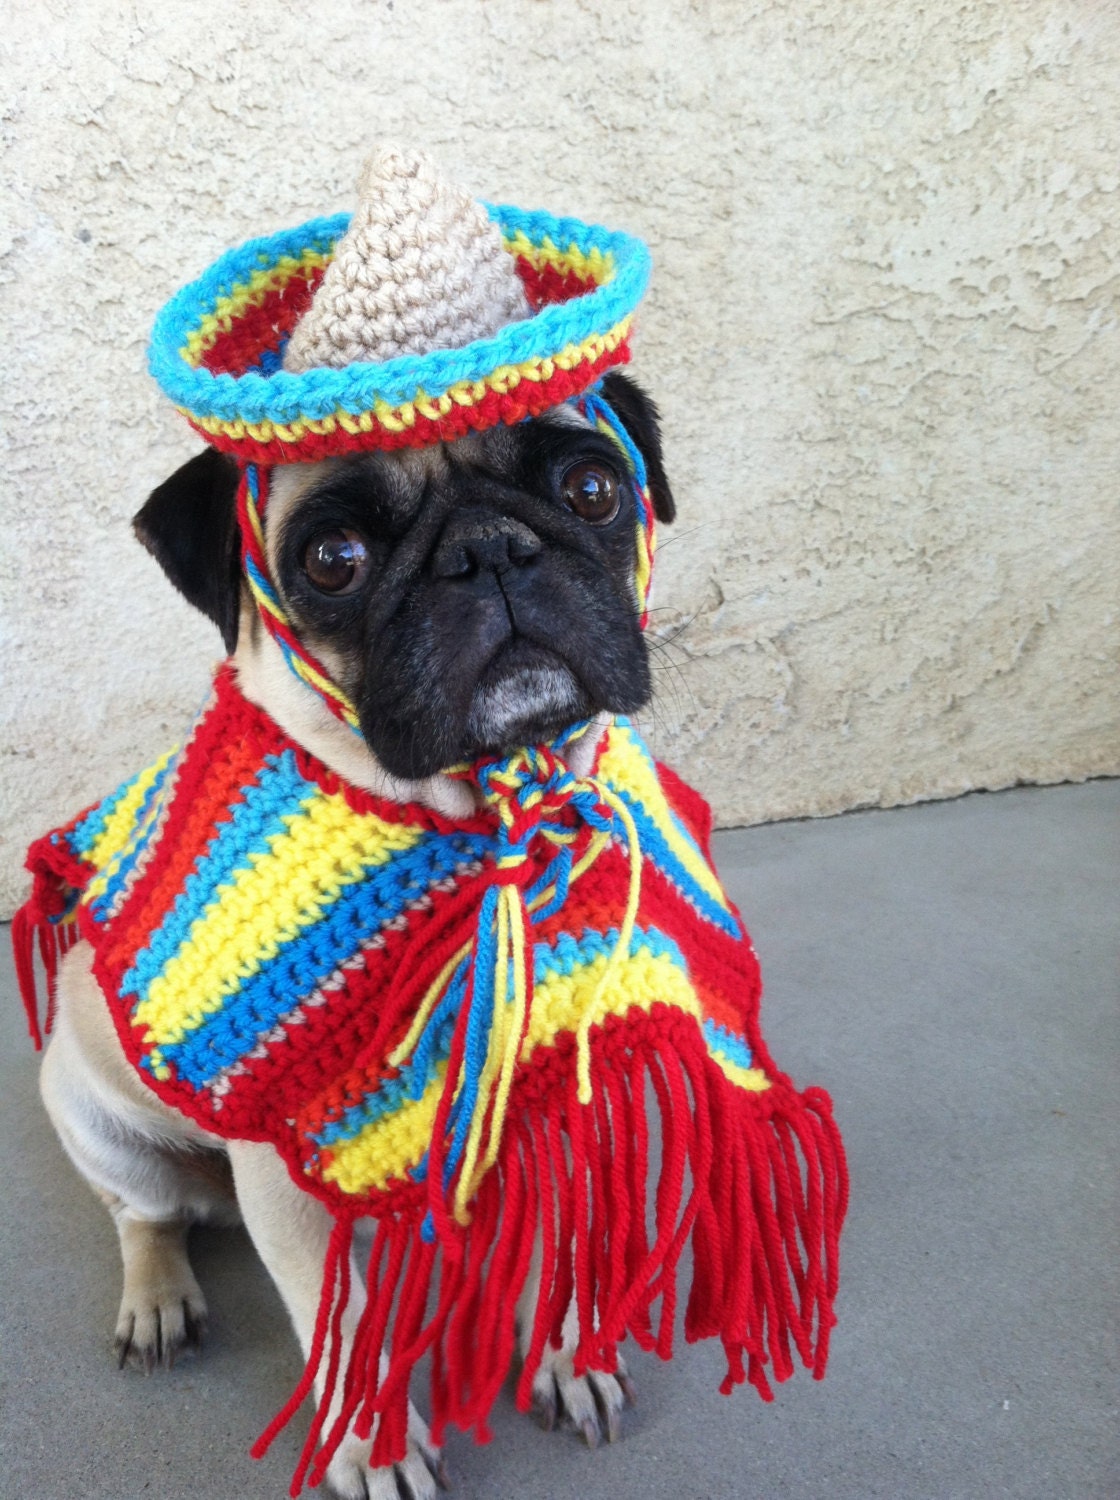 Hats for dogs-Costumes-Cinco De Mayo-Pugs-Novelty Hats-Hats for Pugs-Pugs